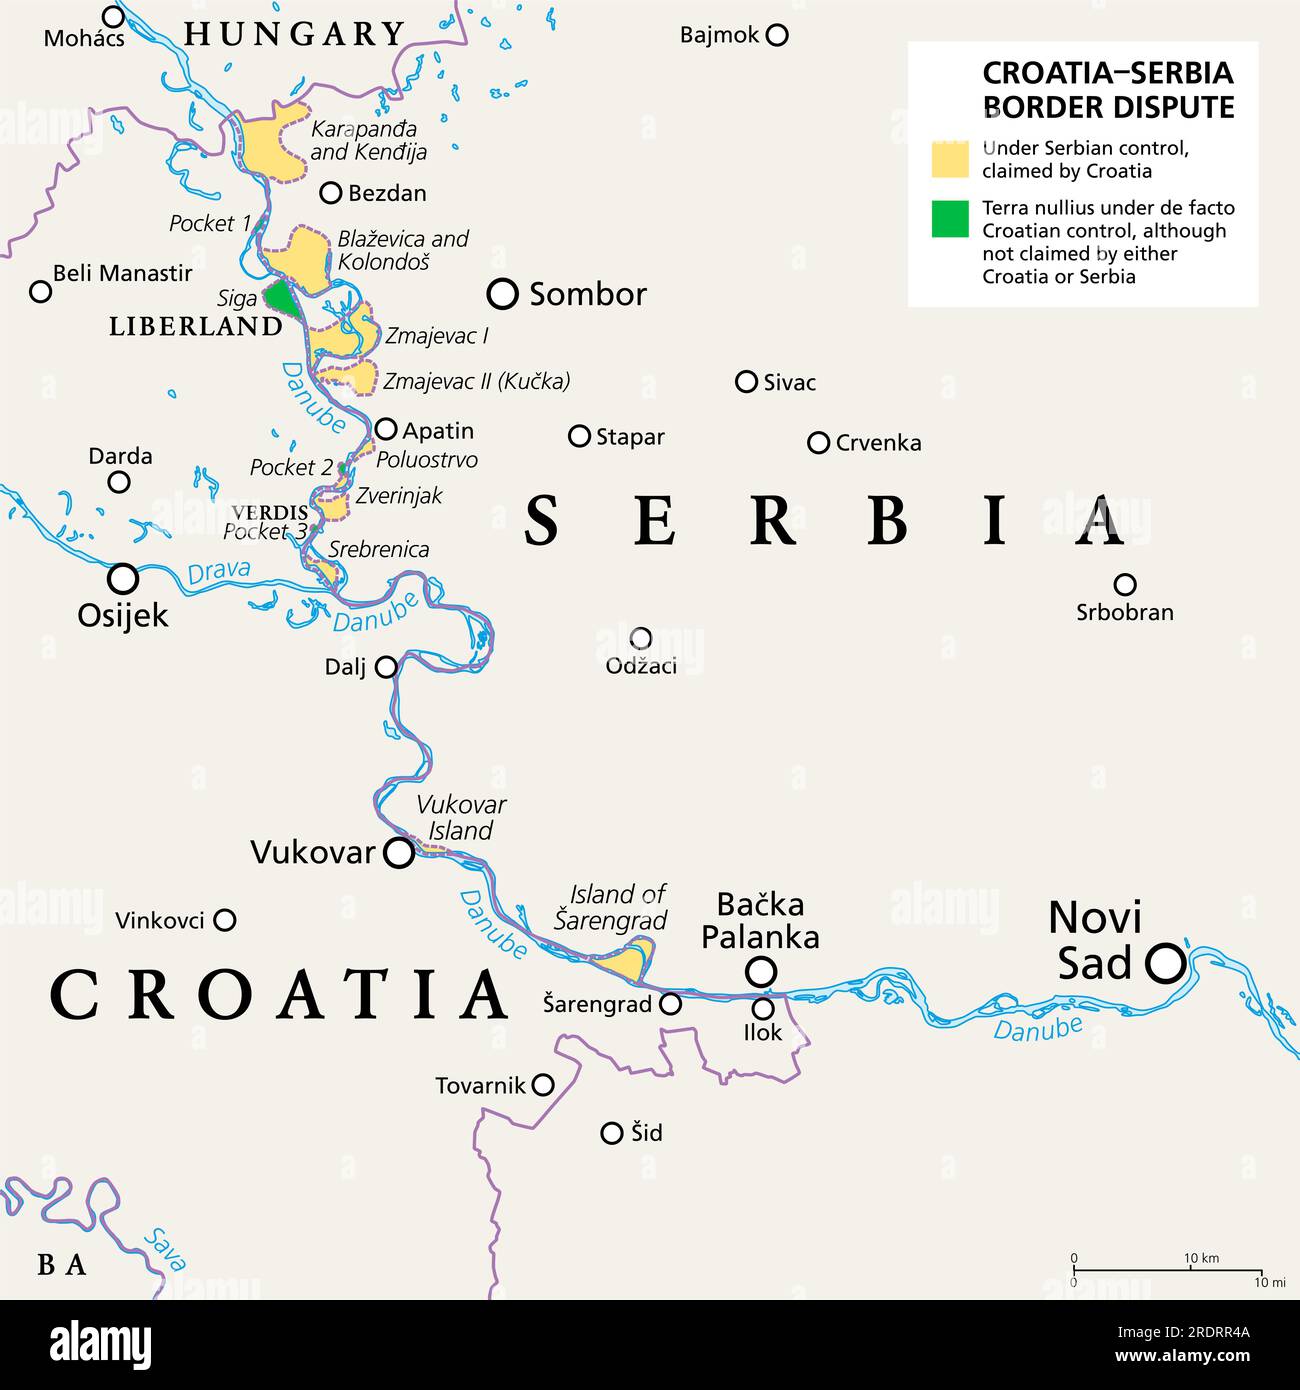 Croatia-Serbia border dispute, political map. Area under Serbian control, claimed by Croatia (yellow). No man's land claimed by Liberland and Verdis. Stock Photo